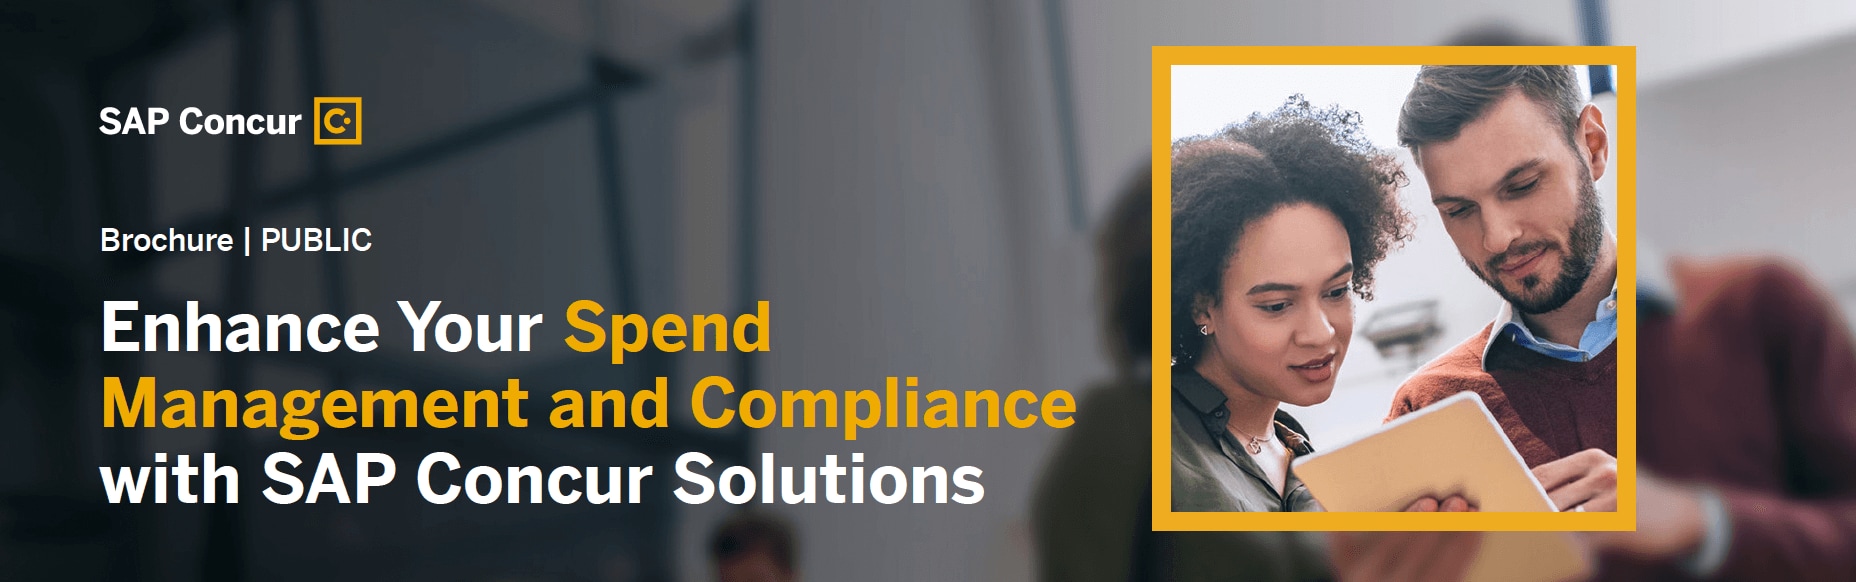 Enhance your Compliance and Spend Management with SAP Concur solutions 